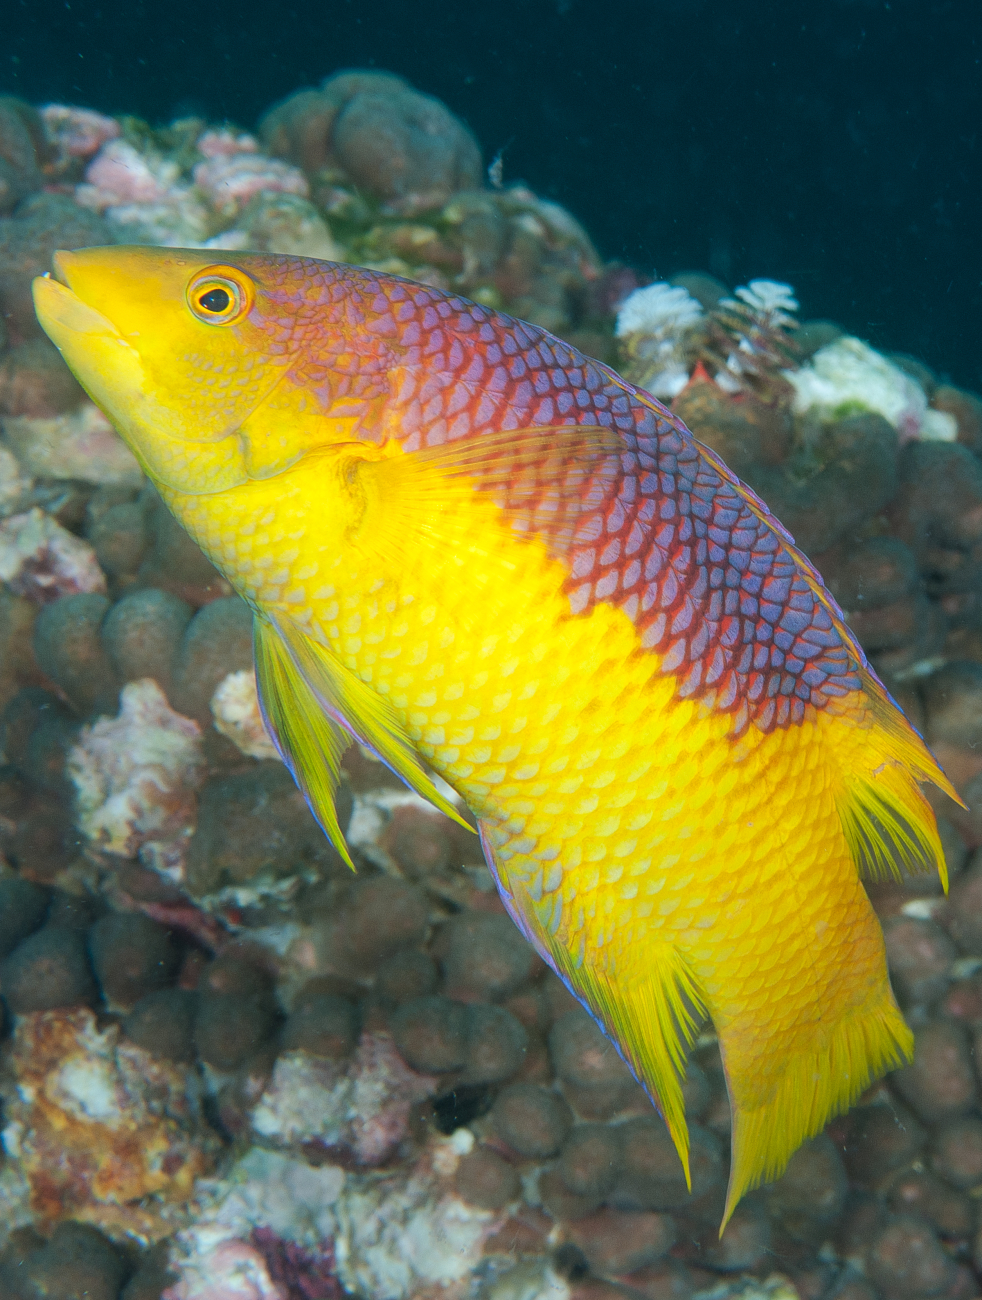 Side view of a Spanish hogfish